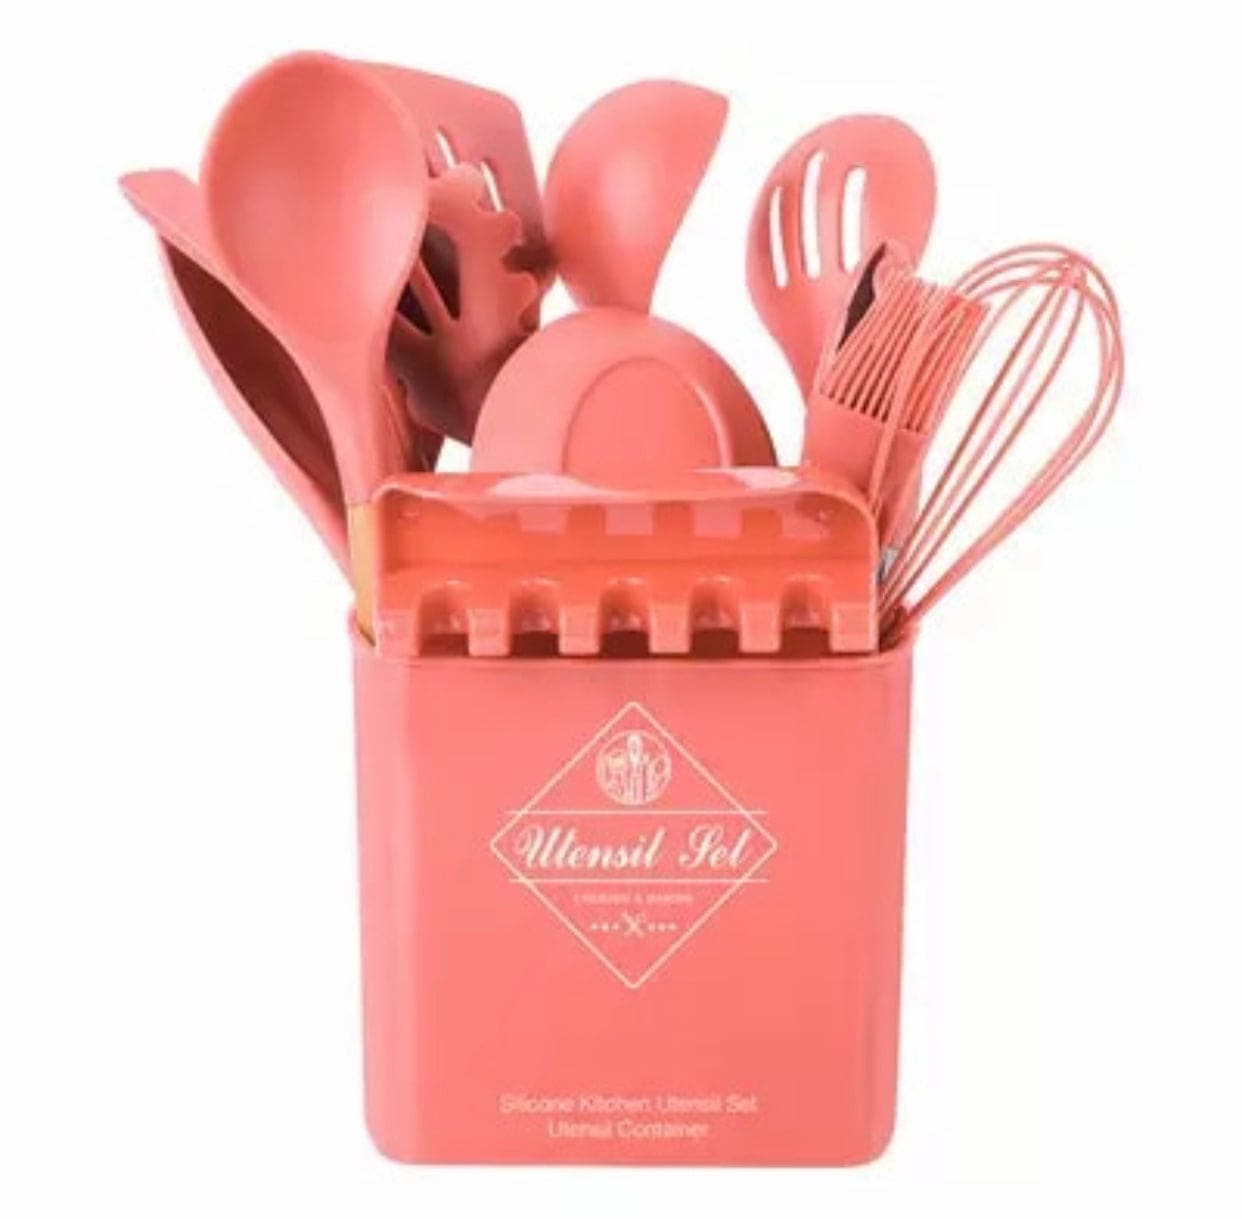 13pcs Silicone Kitchenware Heat Resistant Utensils Set With Spoon Holder, Non-Stick Heat Resistant Silicone Cookware Set, Silicone Cooking Utensils Set With Holder